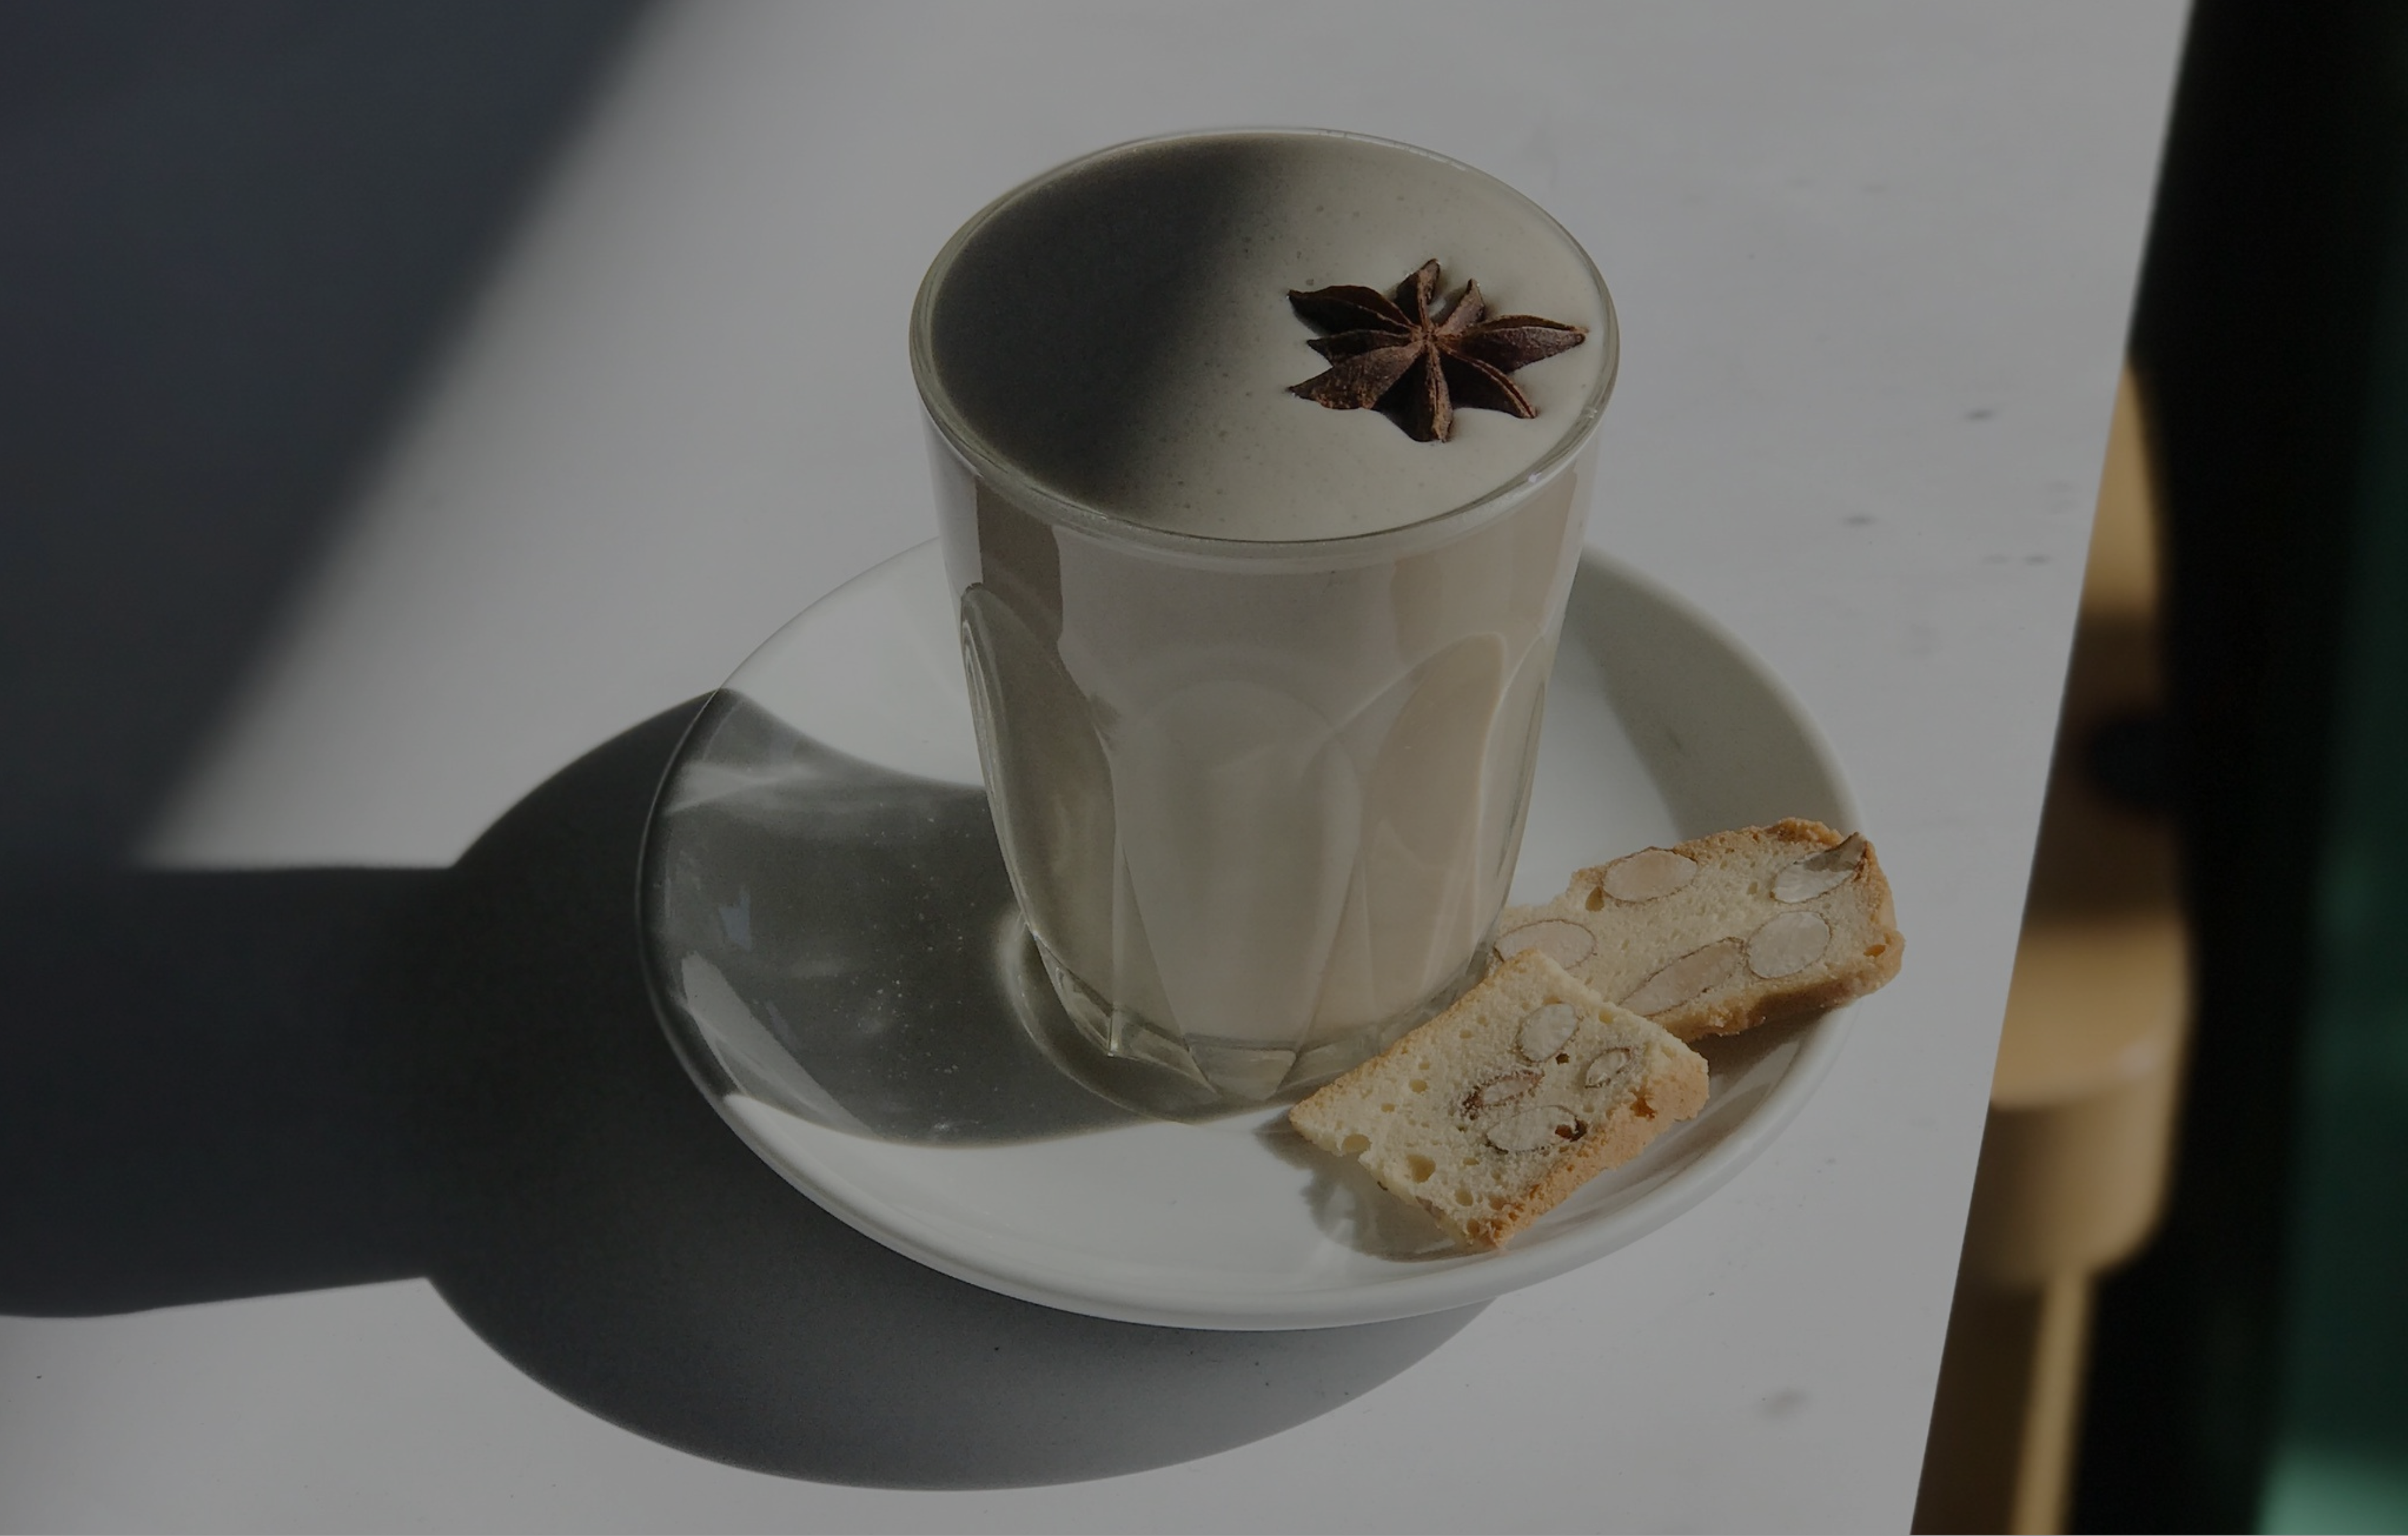  A cup of chai latte garnished with star anise, served on top of a side plate with biscotti, infusing the air with anticipation and delight